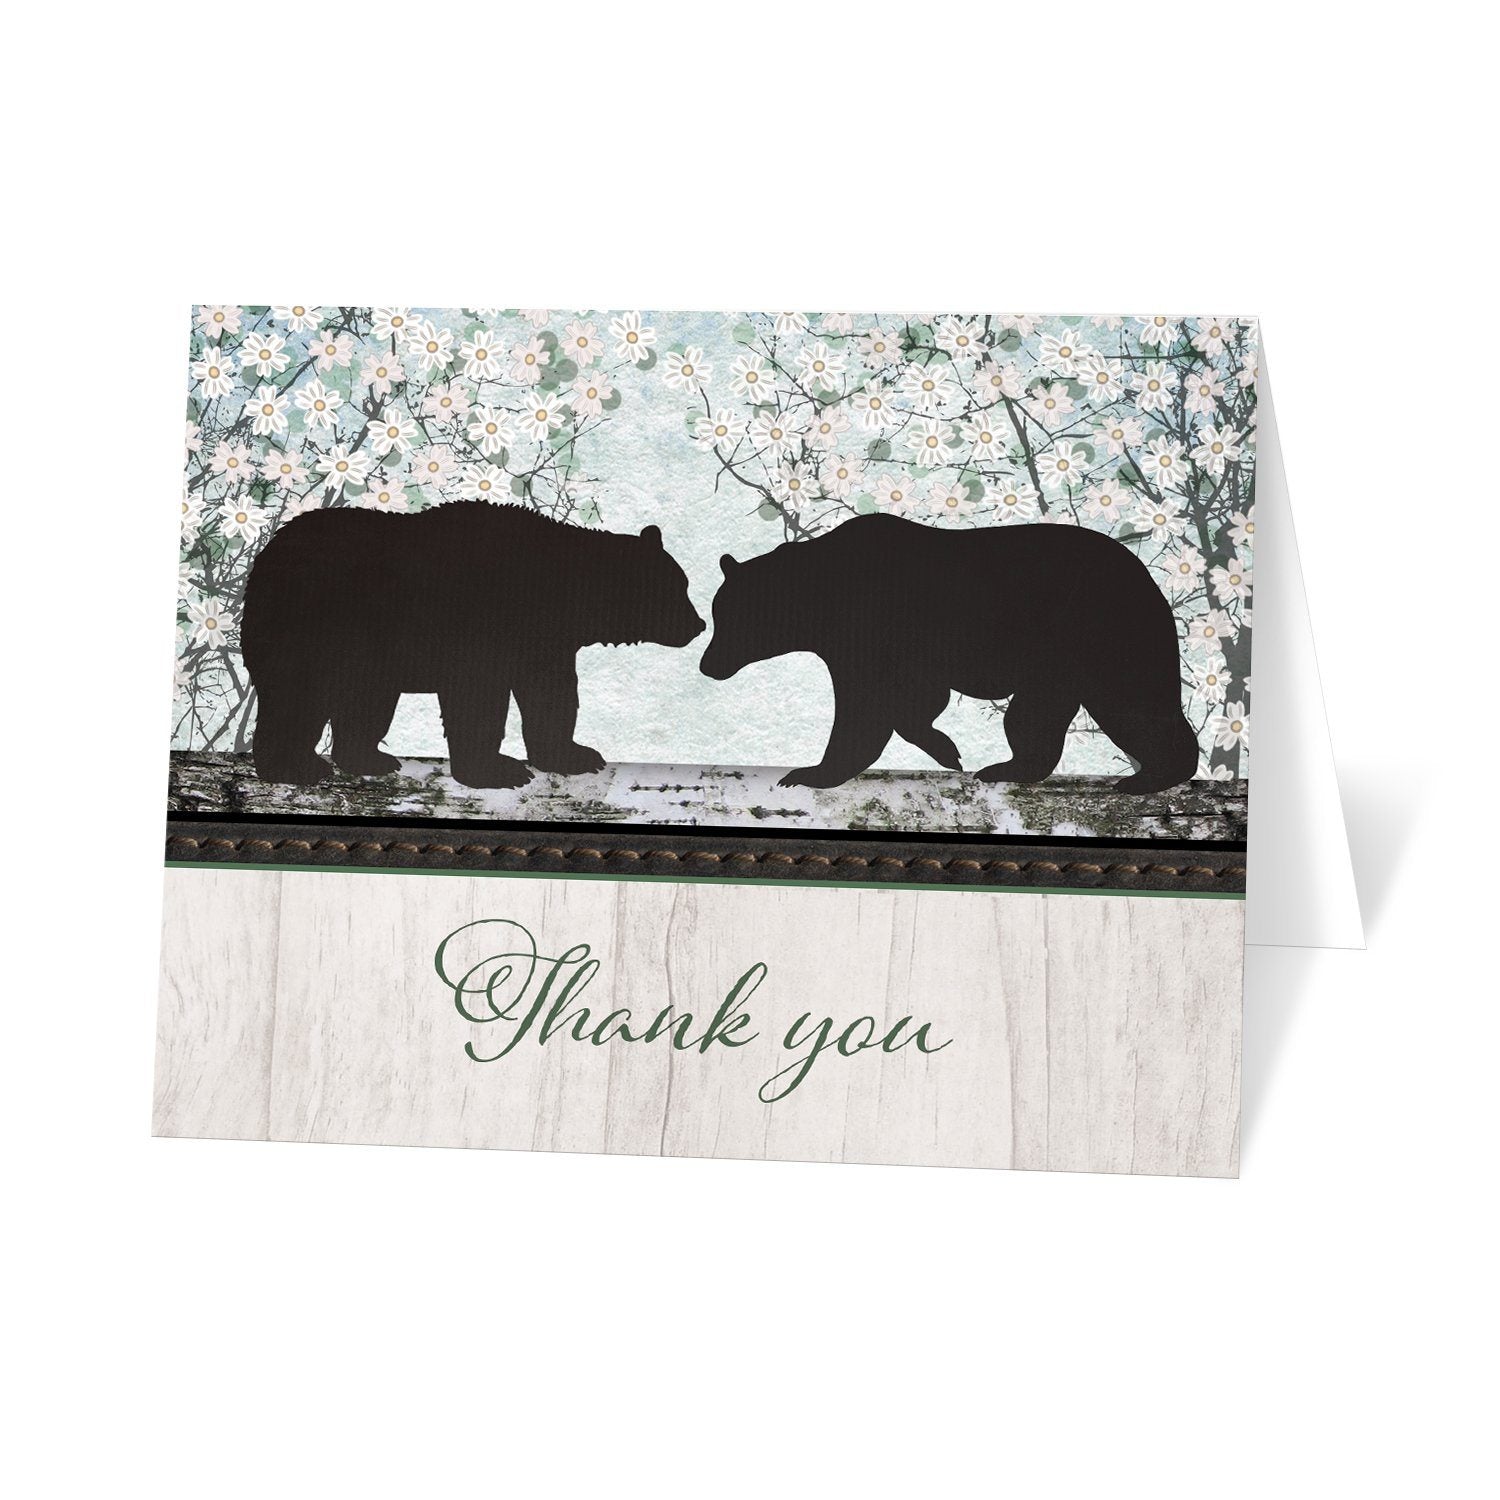 Rustic Bear Spring Floral Wood Thank You Cards at Artistically Invited